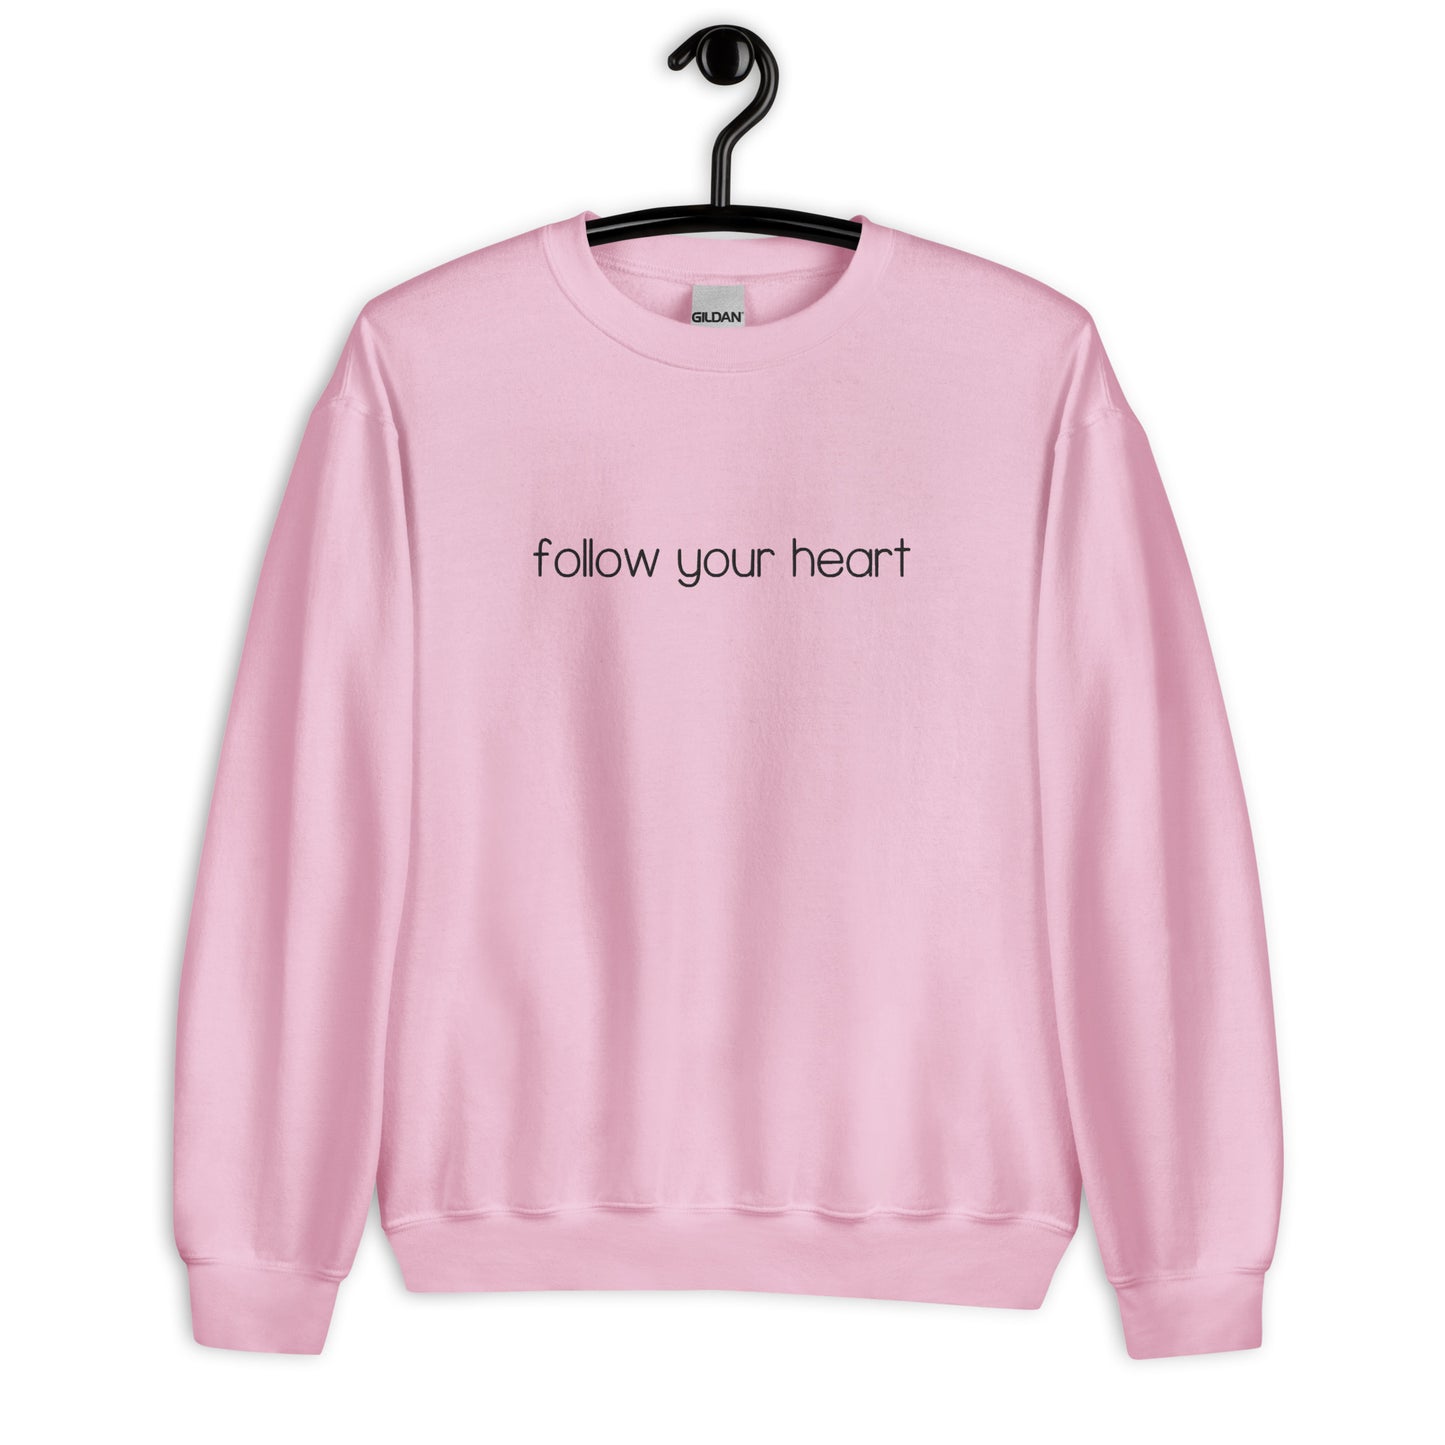 Follow Your Heart Embroidered Sweatshirt